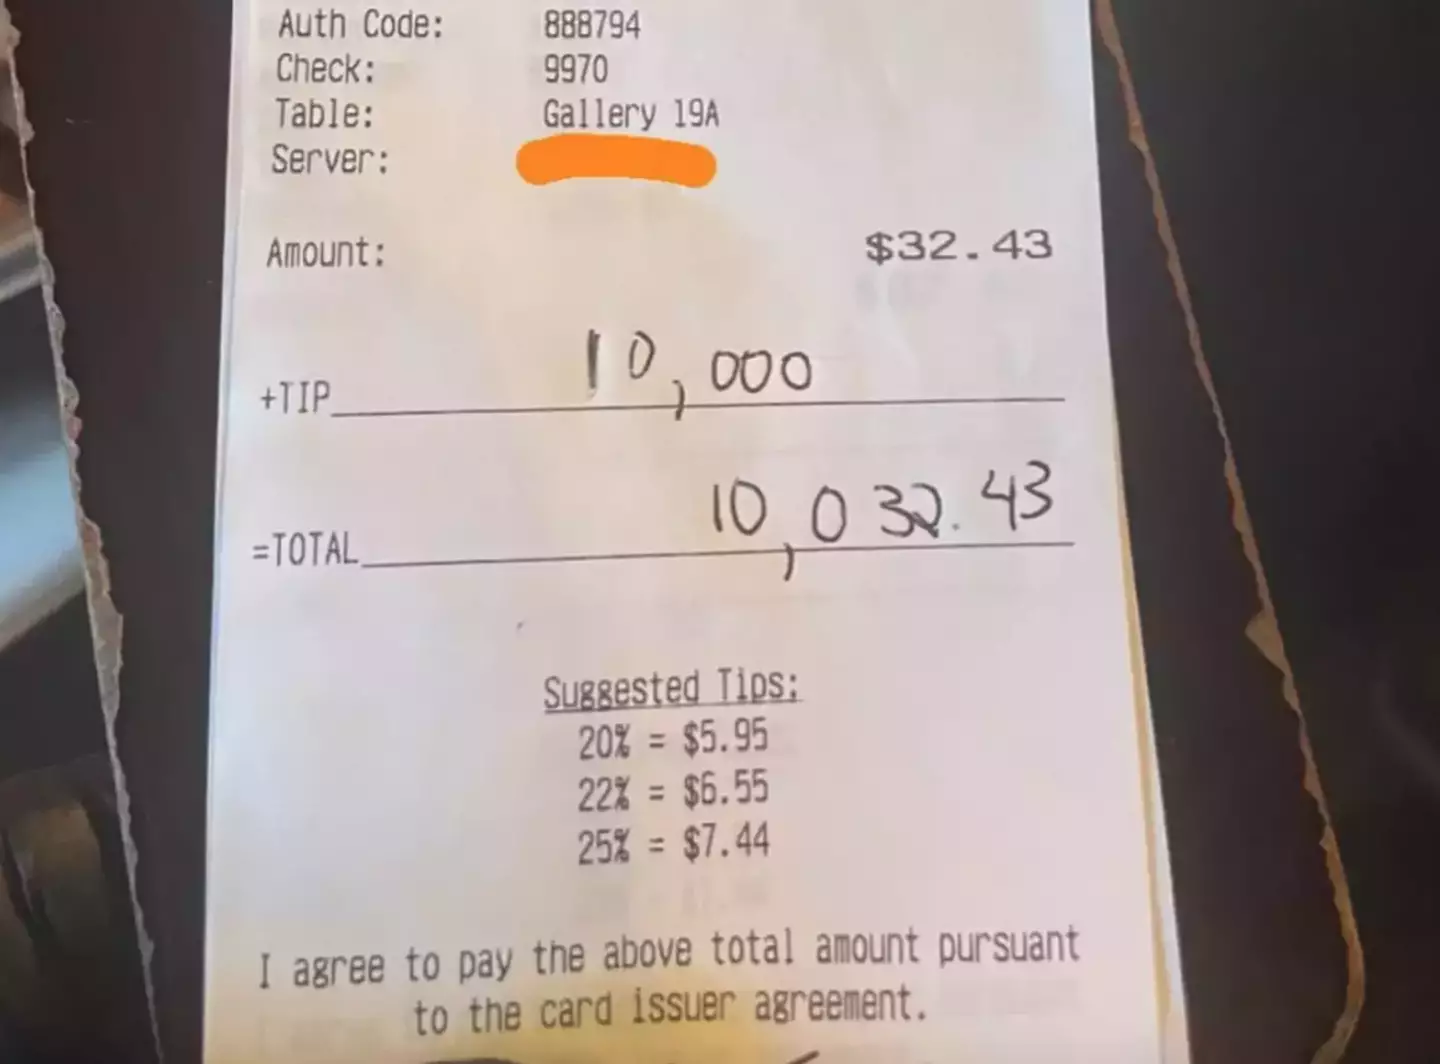 She claims the generous tip resulted in her being fired from her job.